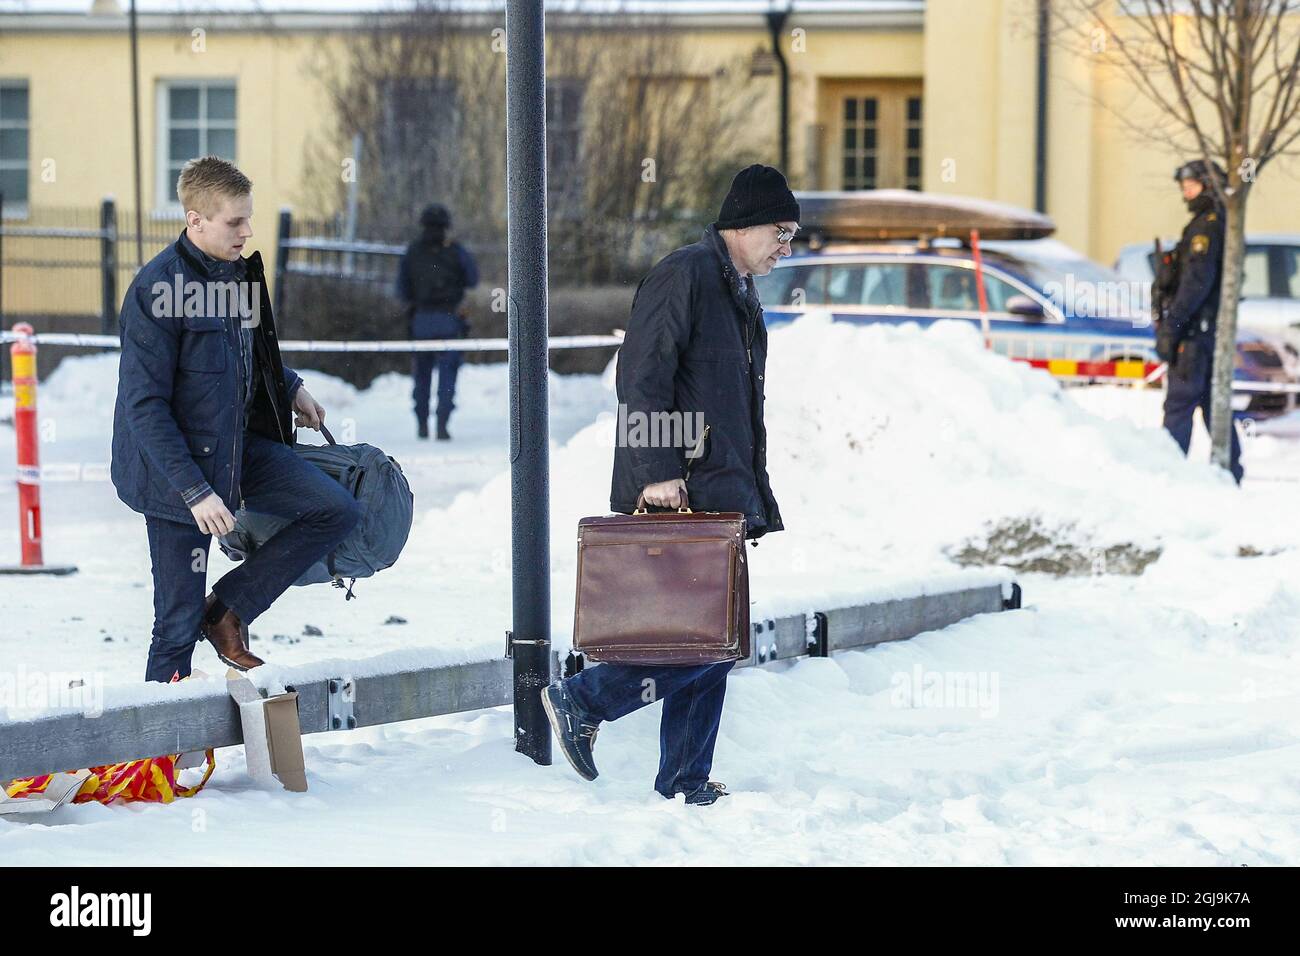 OREBRO 20160107 Artist Lars Vilks and body guards are seen arriving to the the Art School in Orebro, Sweden, January 7, 2016. Lars Vilks still have a death threat over him from fundamentalists after drawing the prophet Mohammed as a dog. Foto: Richard Strom/TT kod 64105 *** BETALBILD  Stock Photo